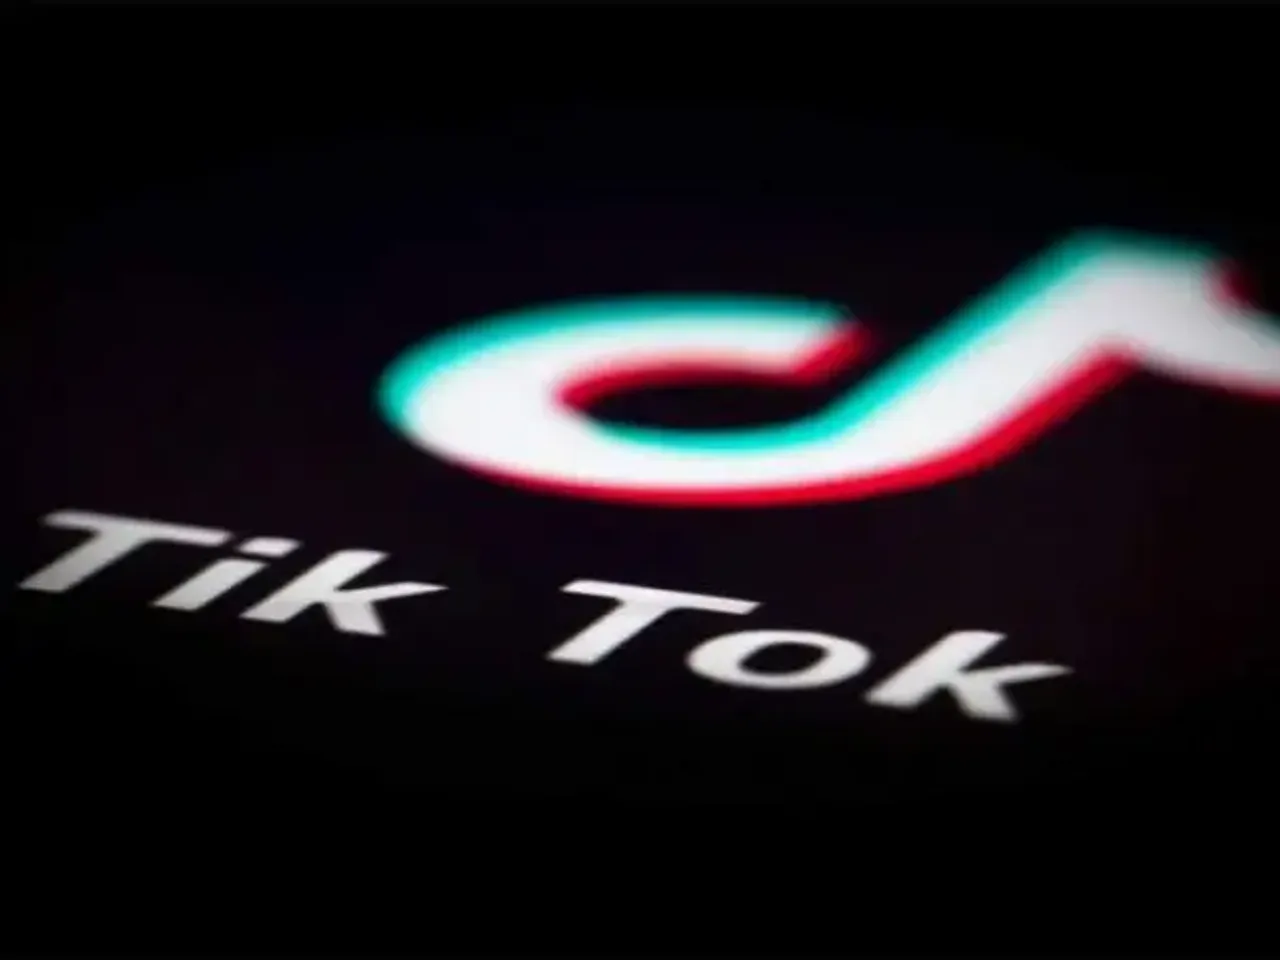 What Is Dry Scooping? Major Health Concerns Arise Over Viral TikTok Trend